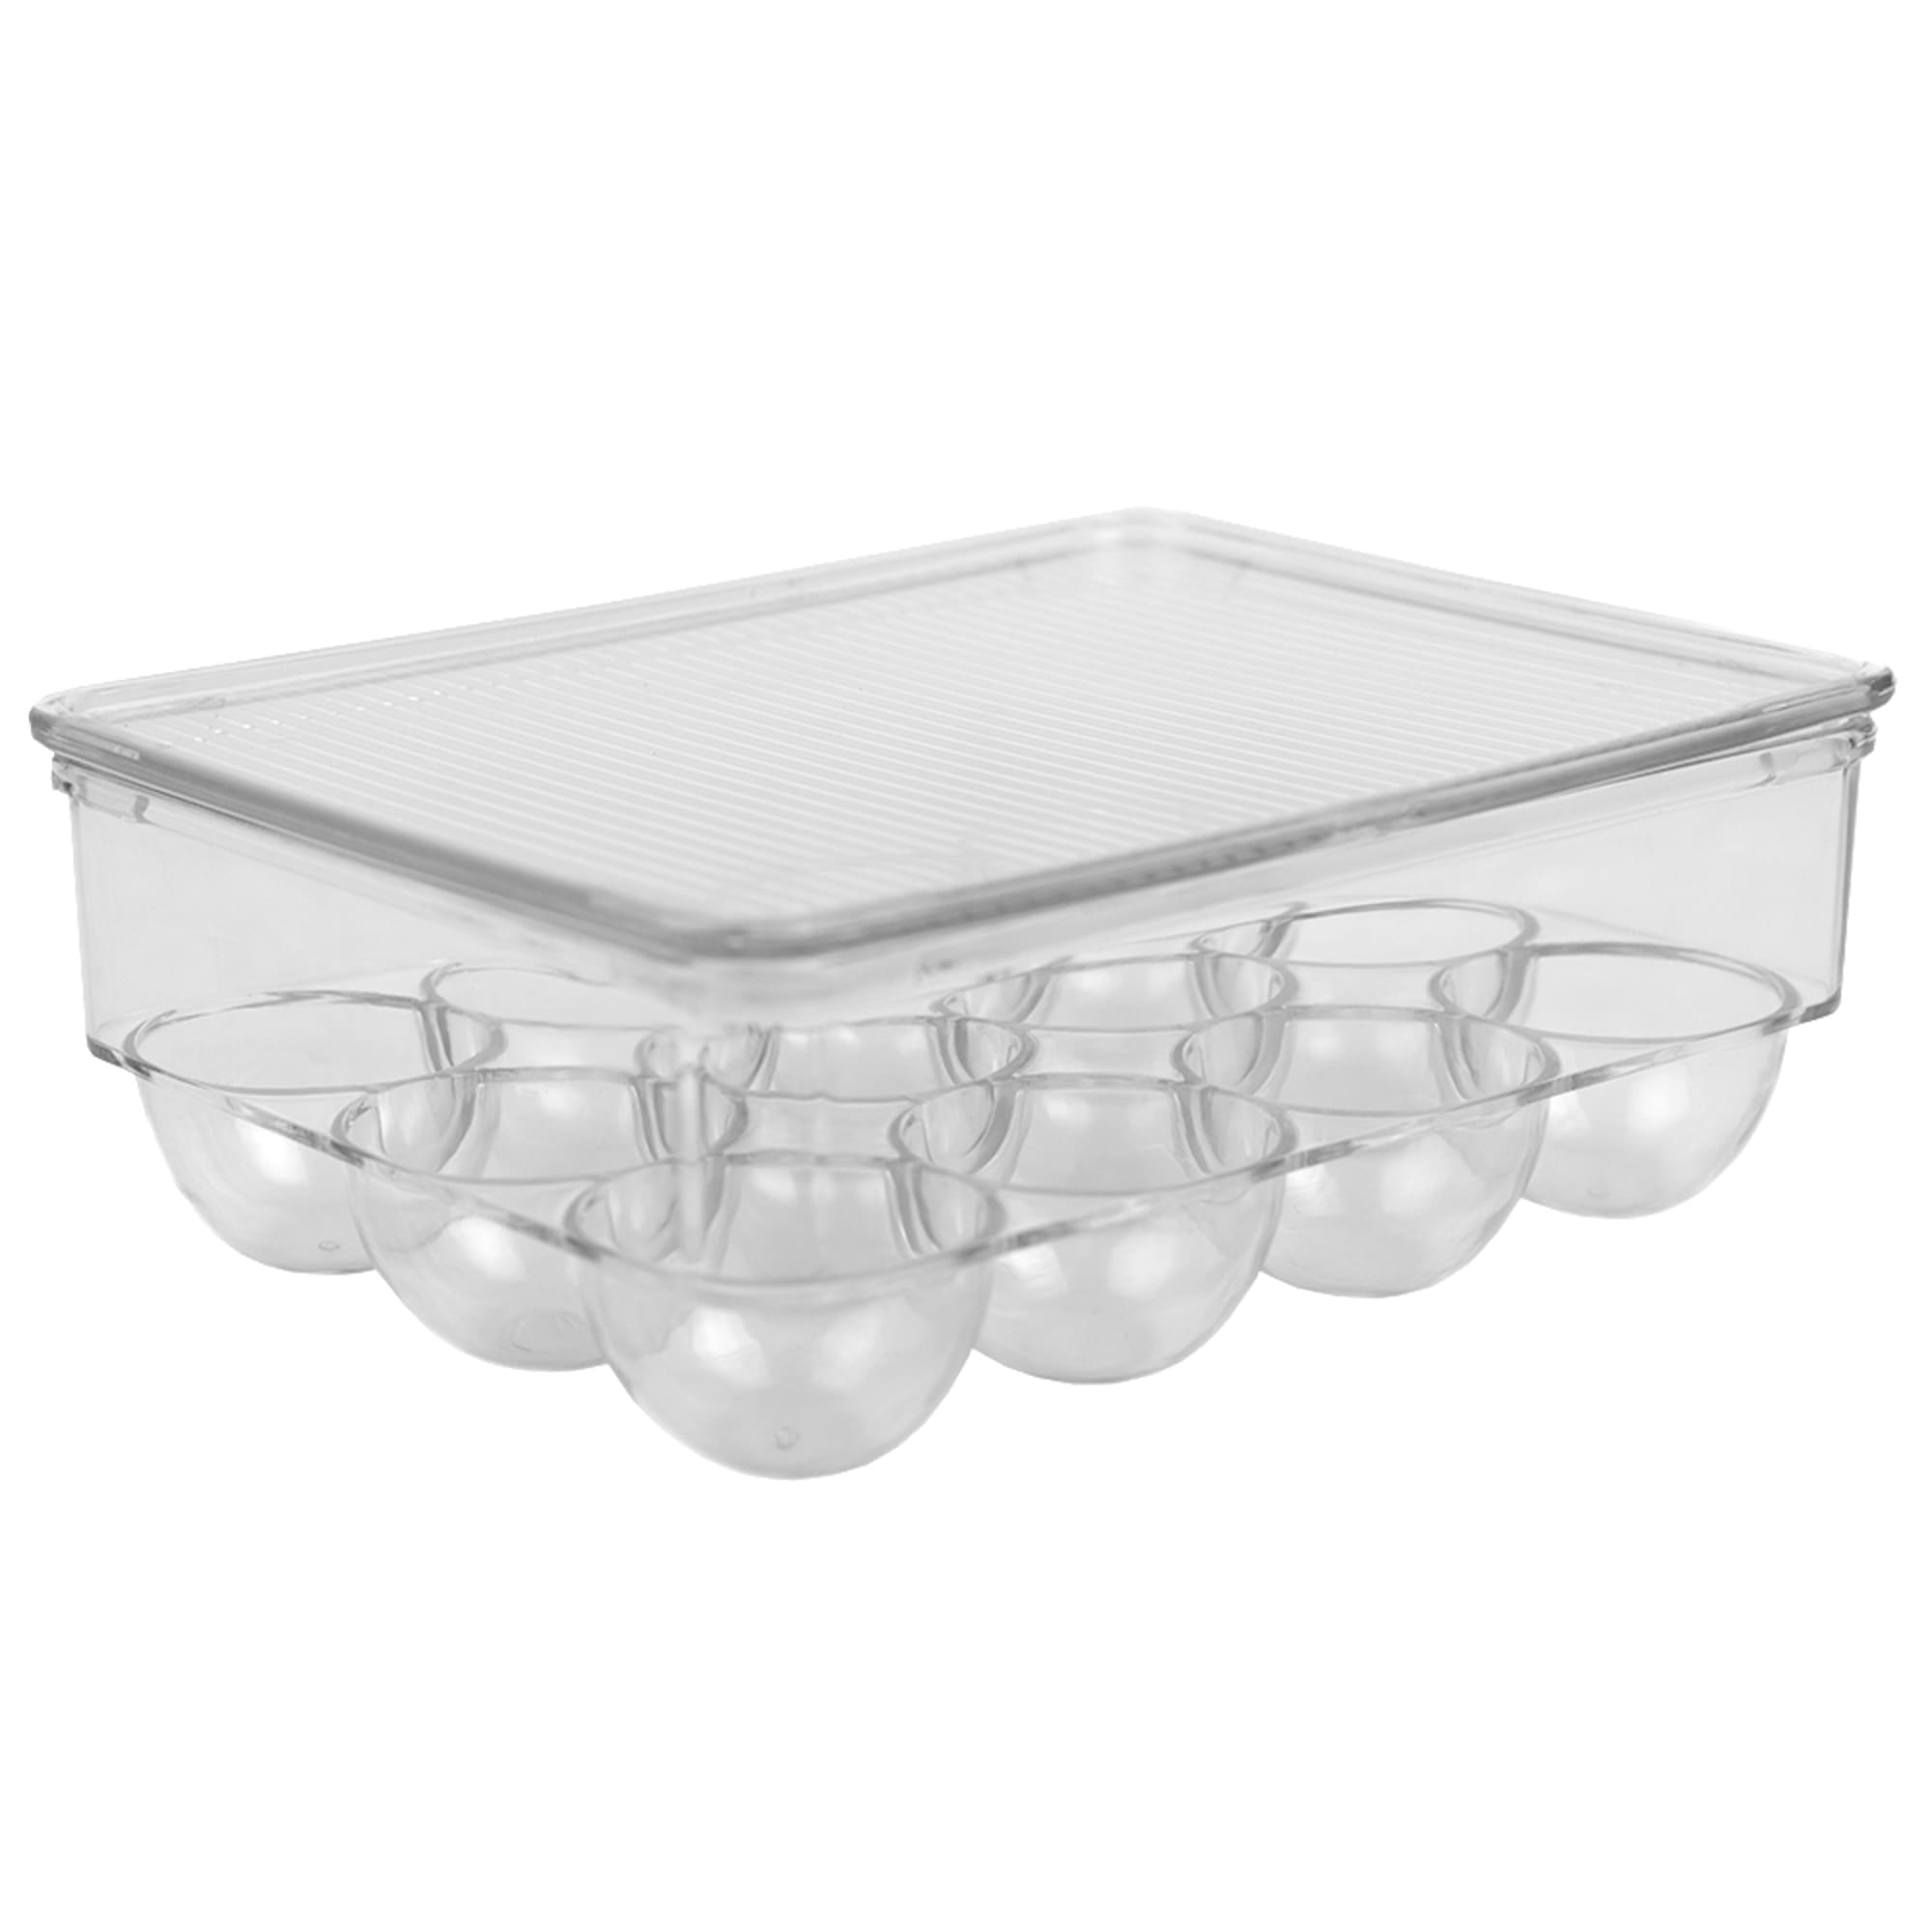 Home Basics 12 Egg Plastic Holder with Lid, Clear $3.00 EACH, CASE PACK OF 12